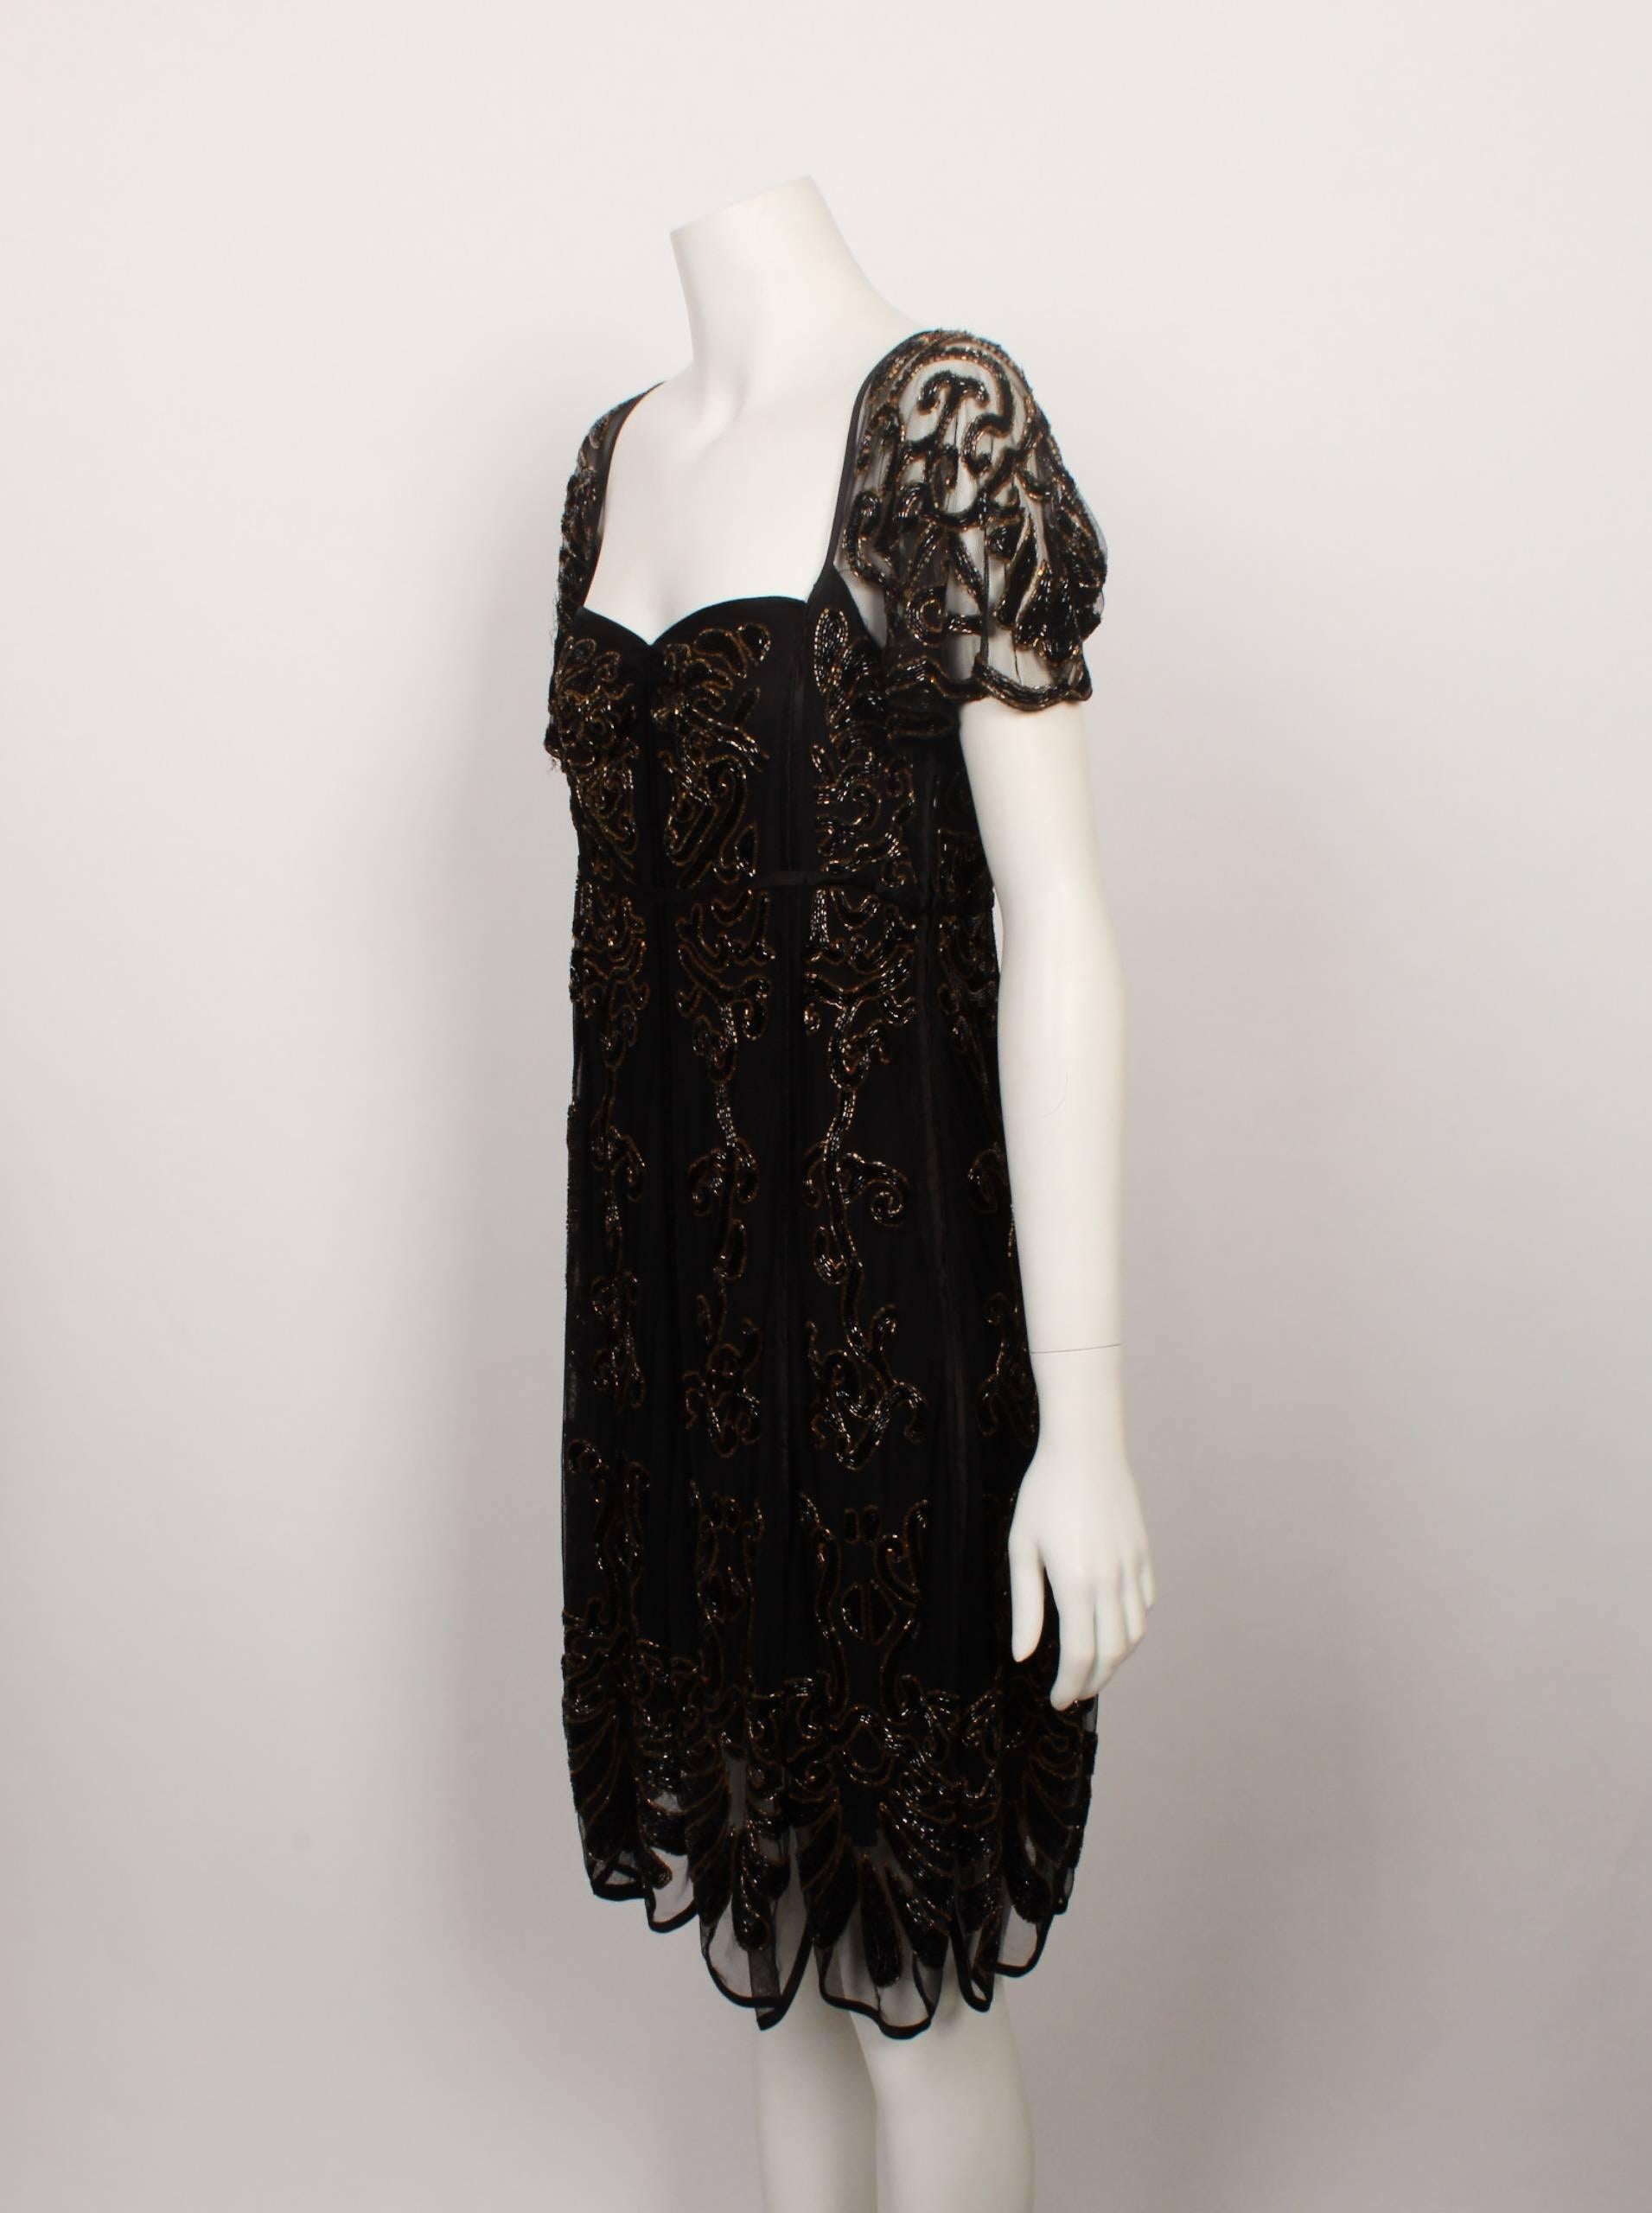 Stunning and timeless Temperely London beaded black veil cocktail dress with scalloped hemline. Delicate veil panels are heavily beaded in black and gold beads. Each panel has satin bound edging. The front neckline is a soft sweetheart shape, and